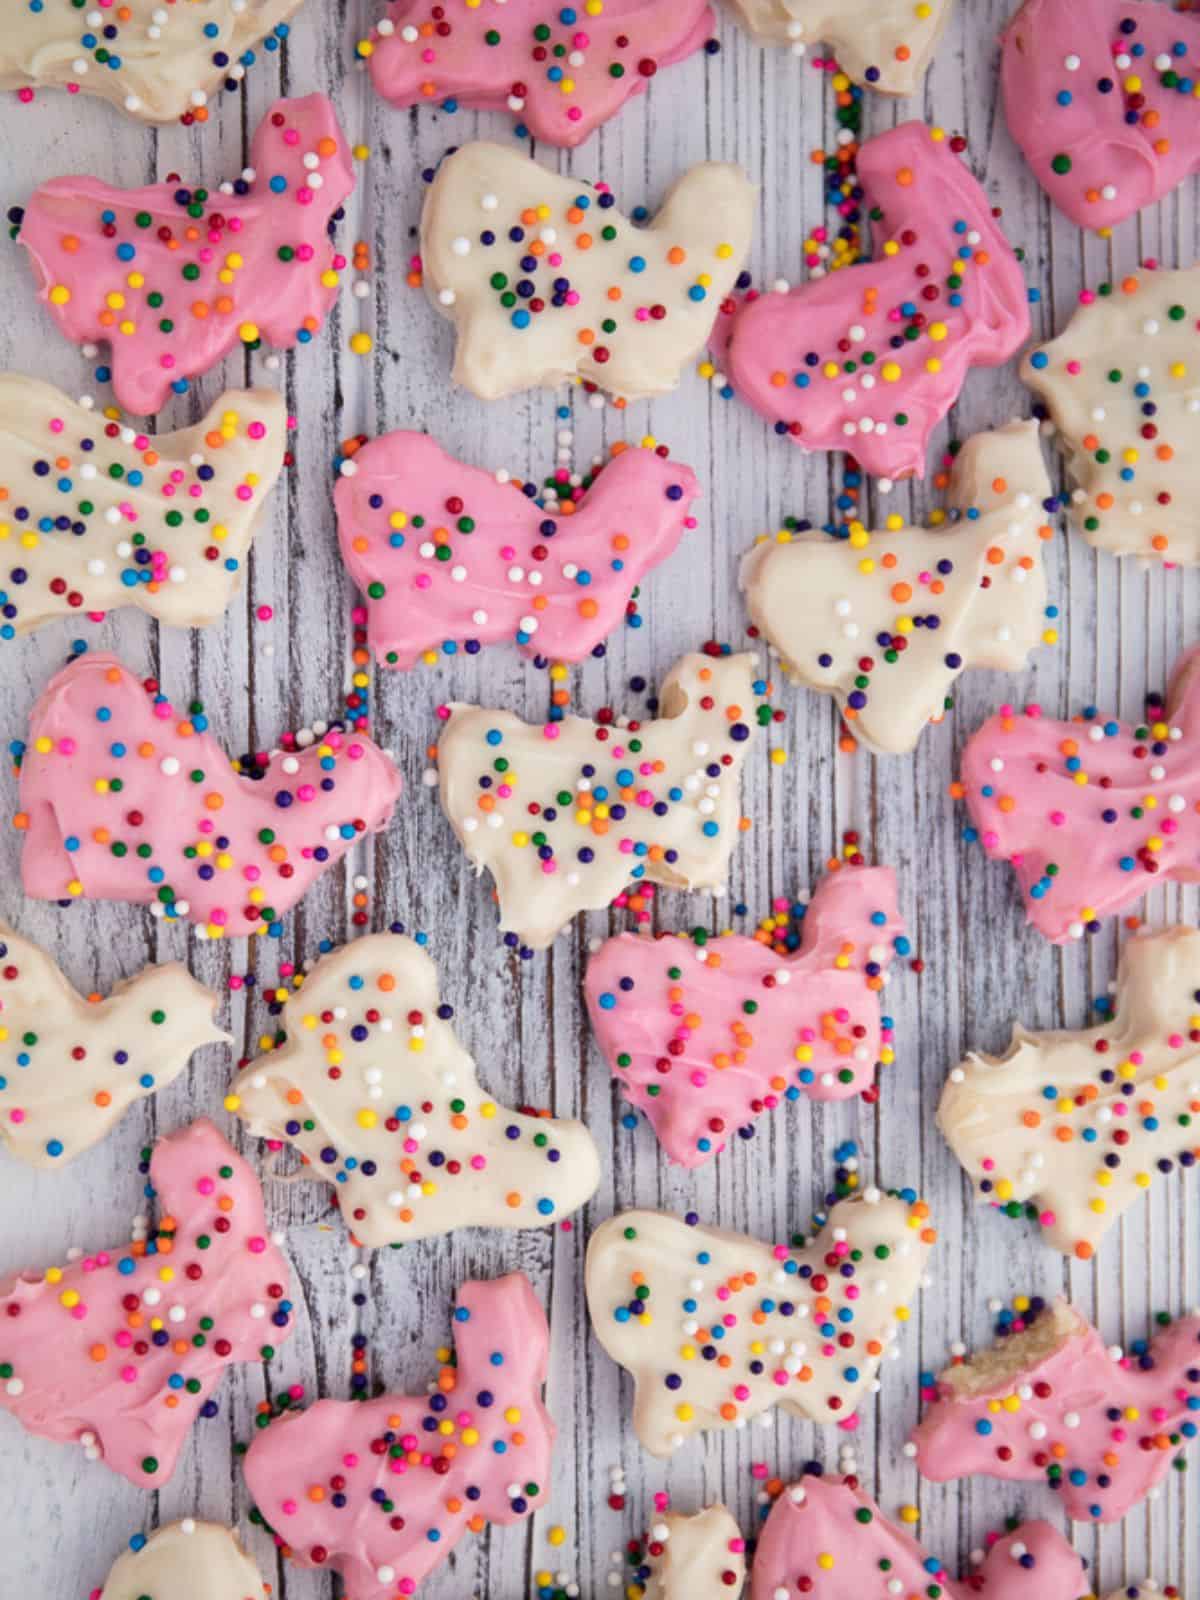 colorful assortment of vegan bunny-shaped cookies with frosted icing.